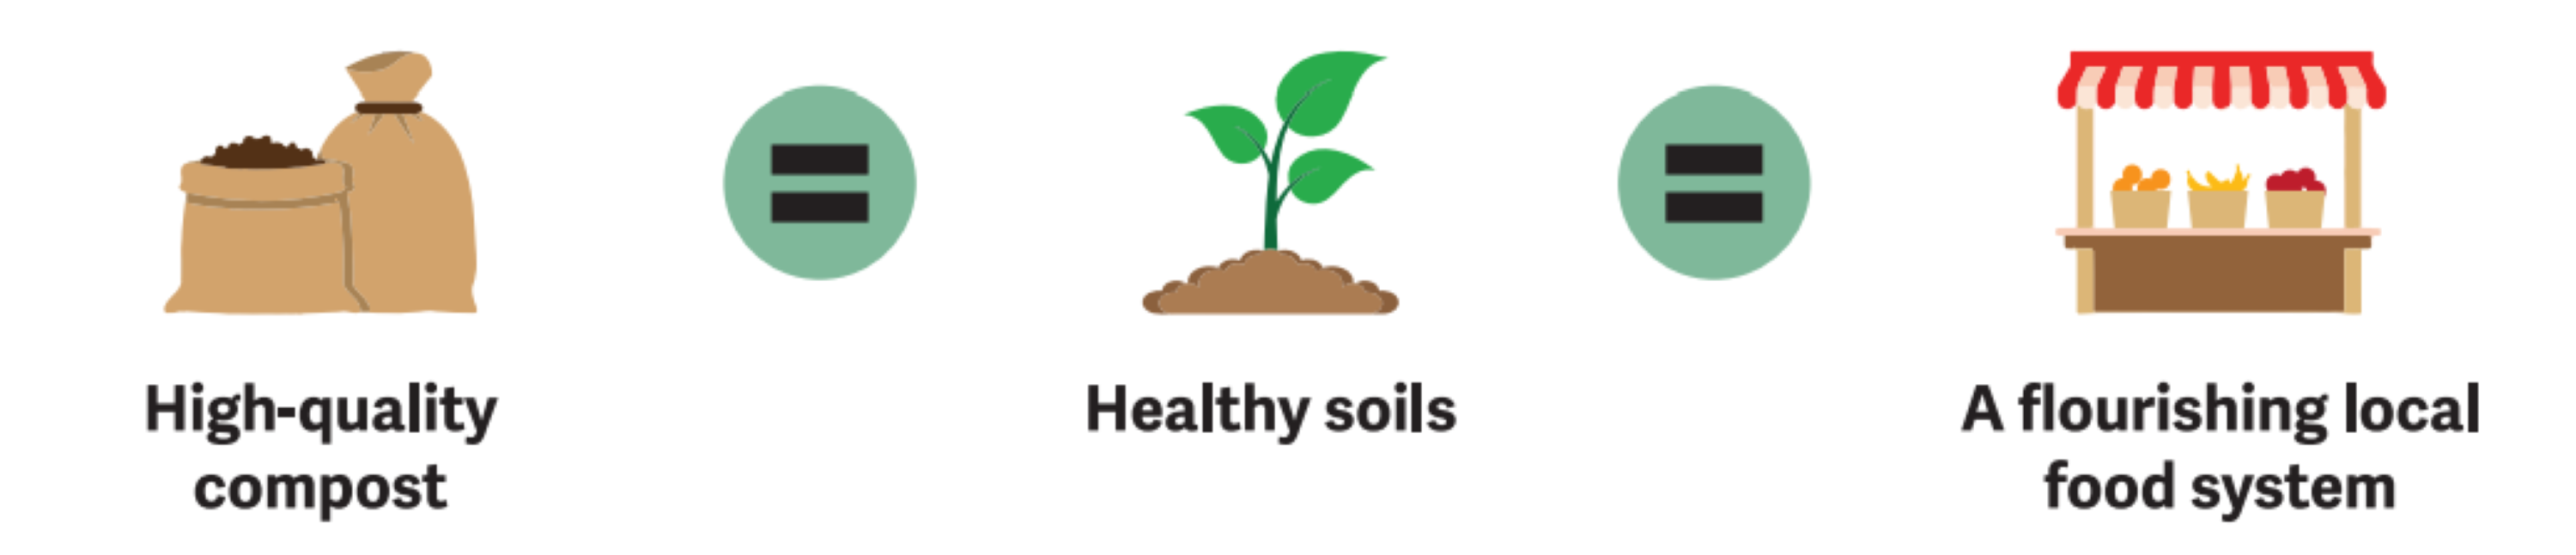 High-quality compost equals healthy soils, which create a flourishing local food system.